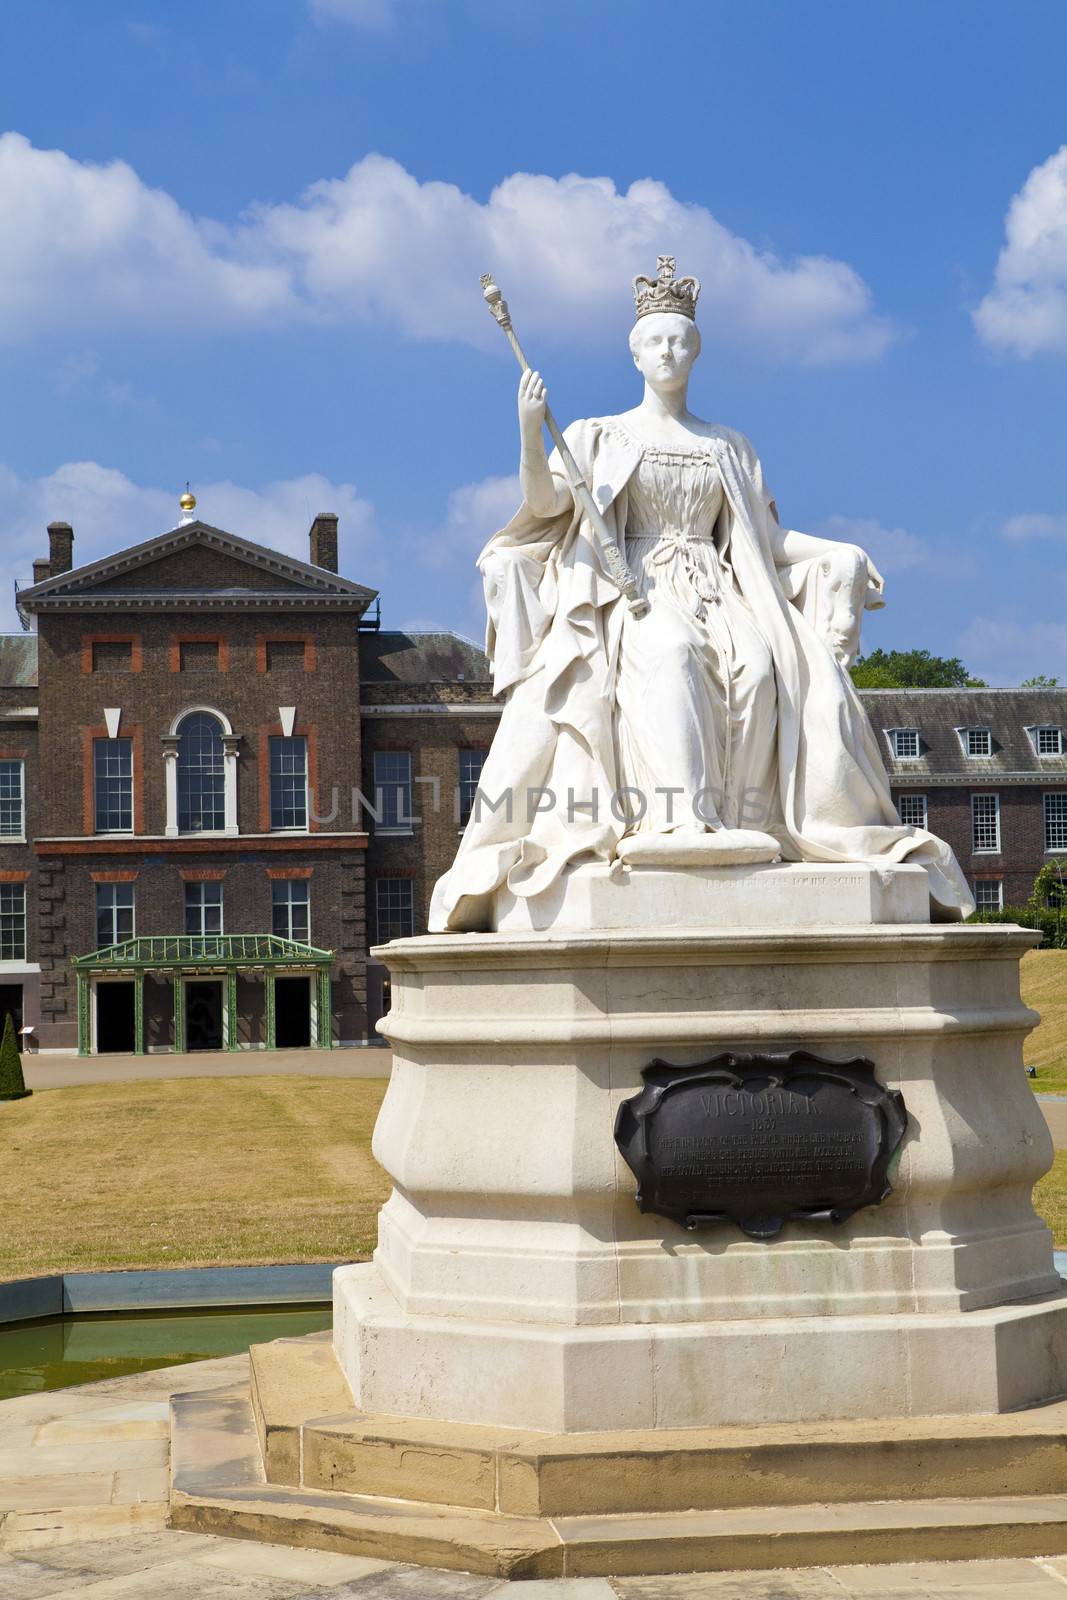 Queen Victoria Statue at Kensington Palace in London by chrisdorney